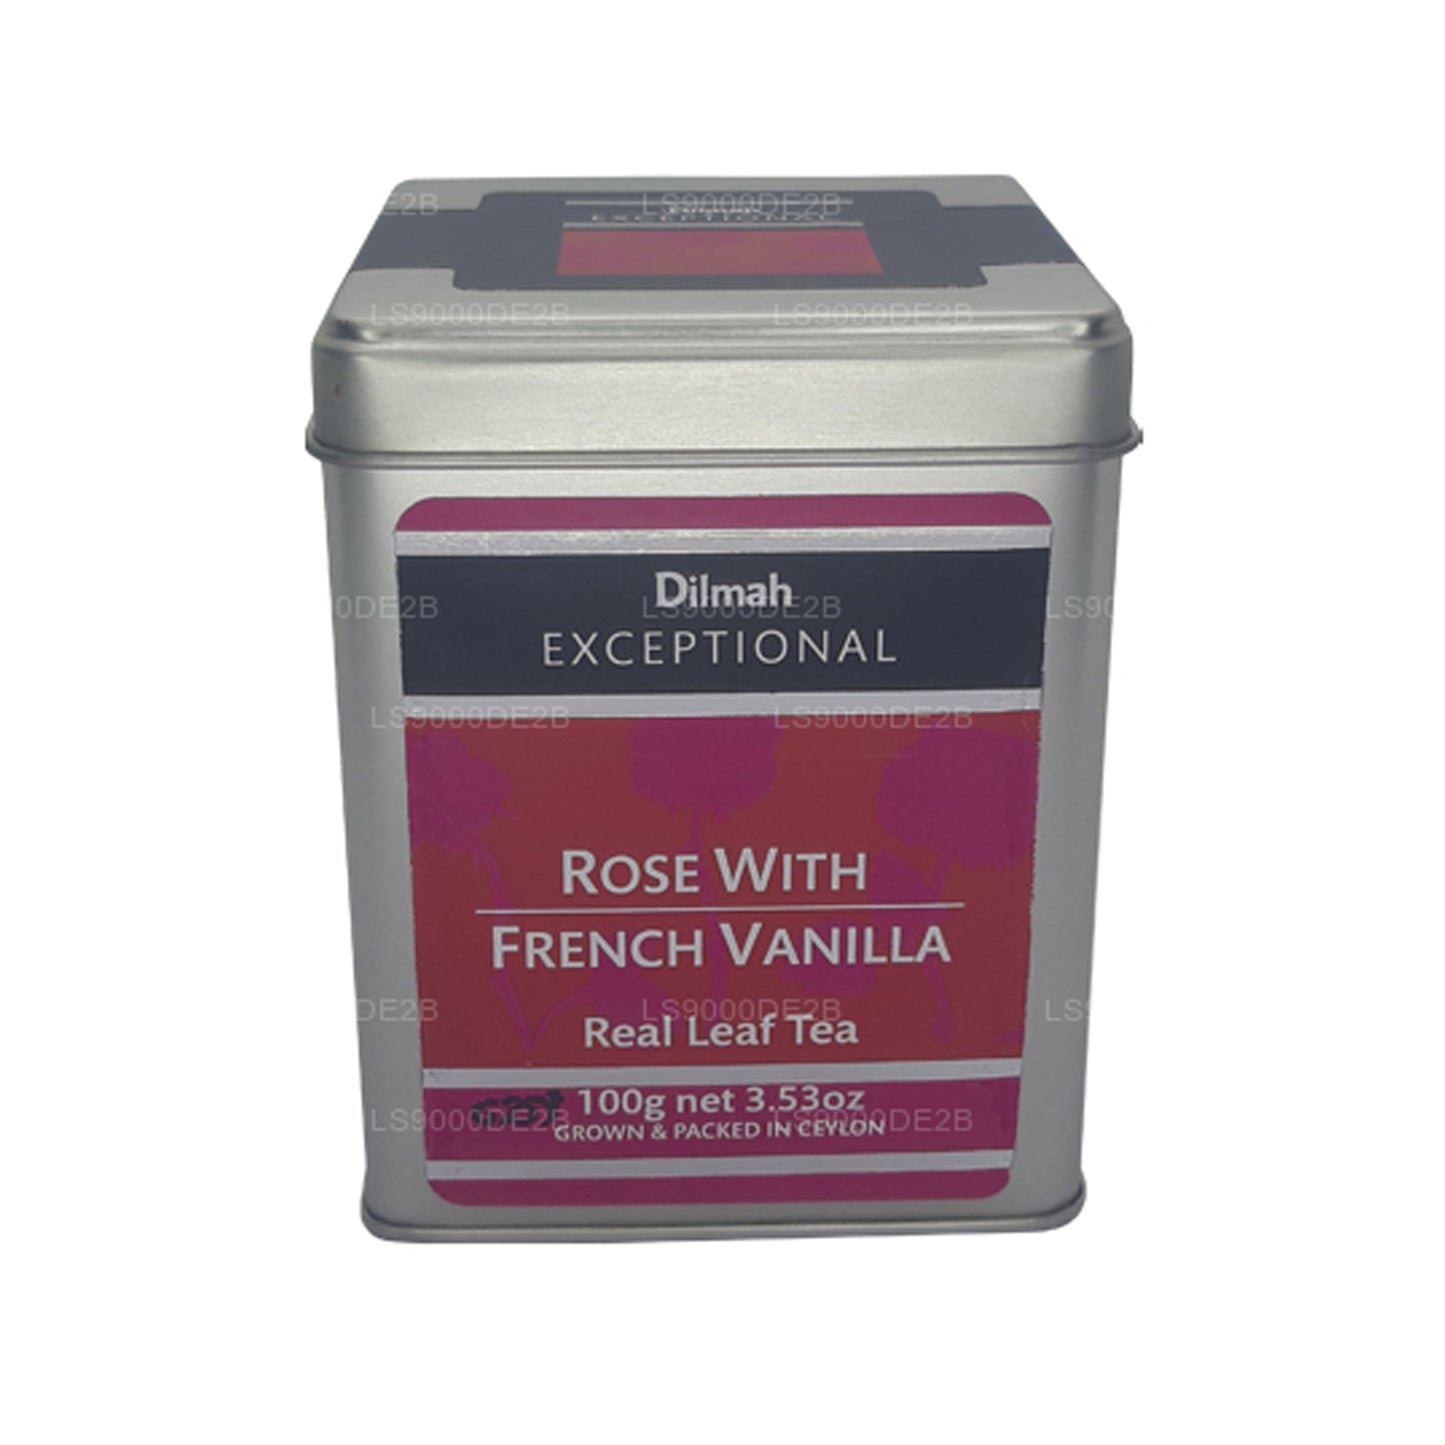 Dilmah Exceptional Rose with French Vanilla Leaf Tea (100g)